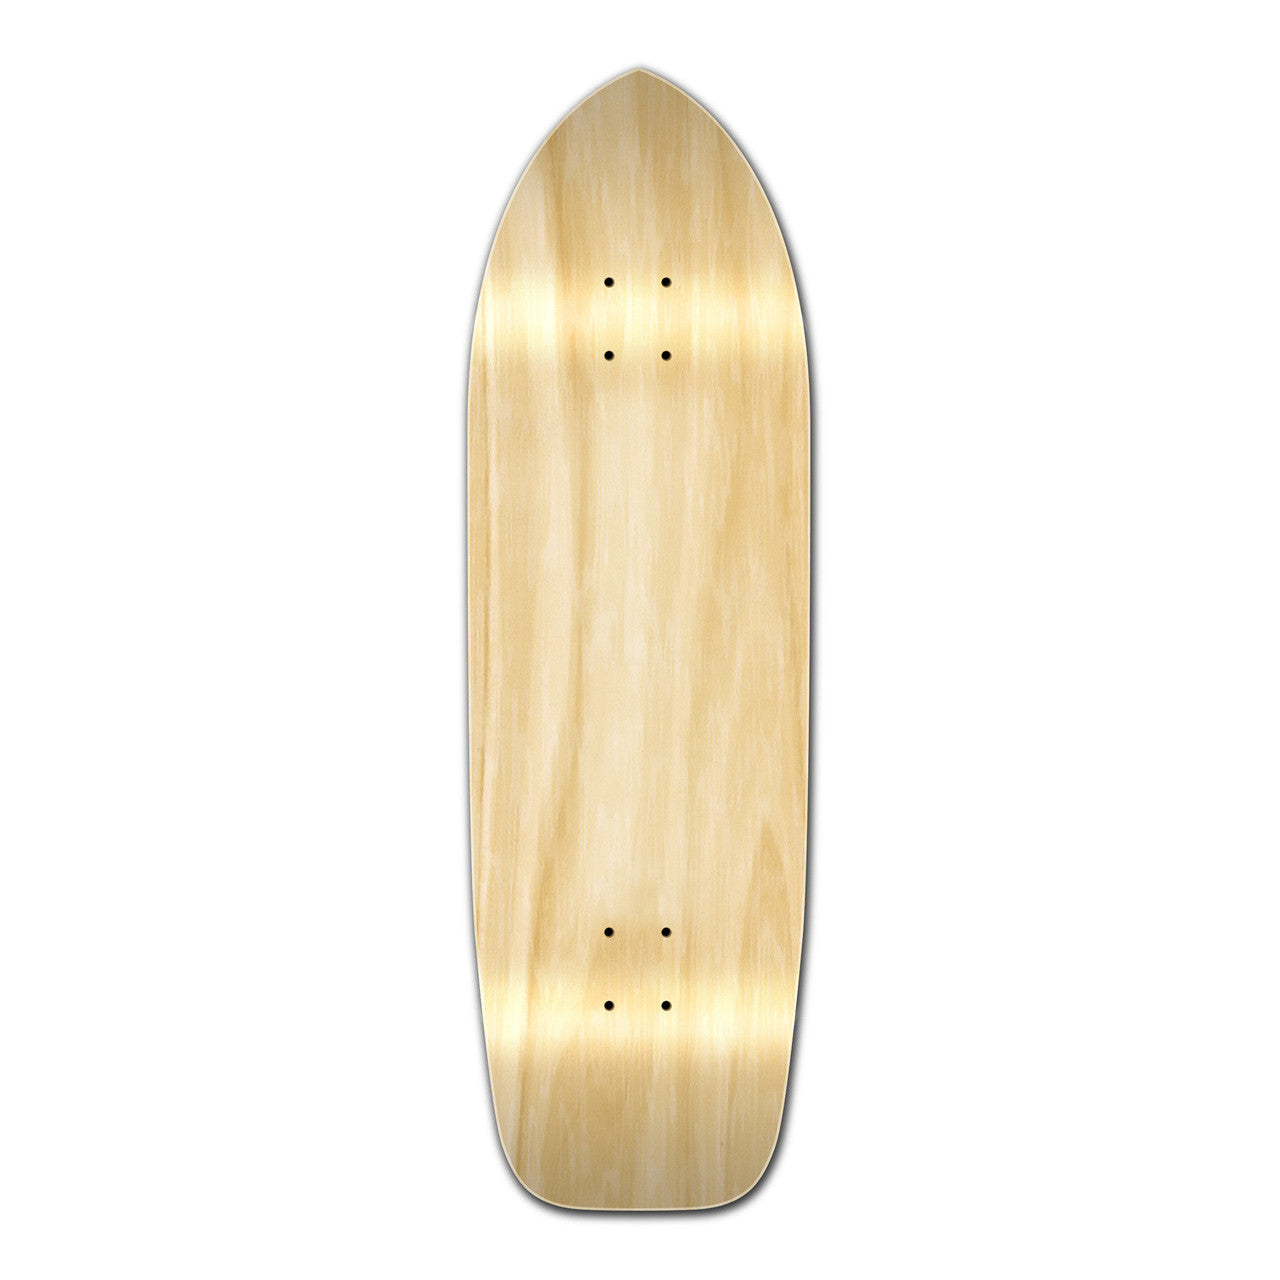 Yocaher Old School Longboard Deck - Natural